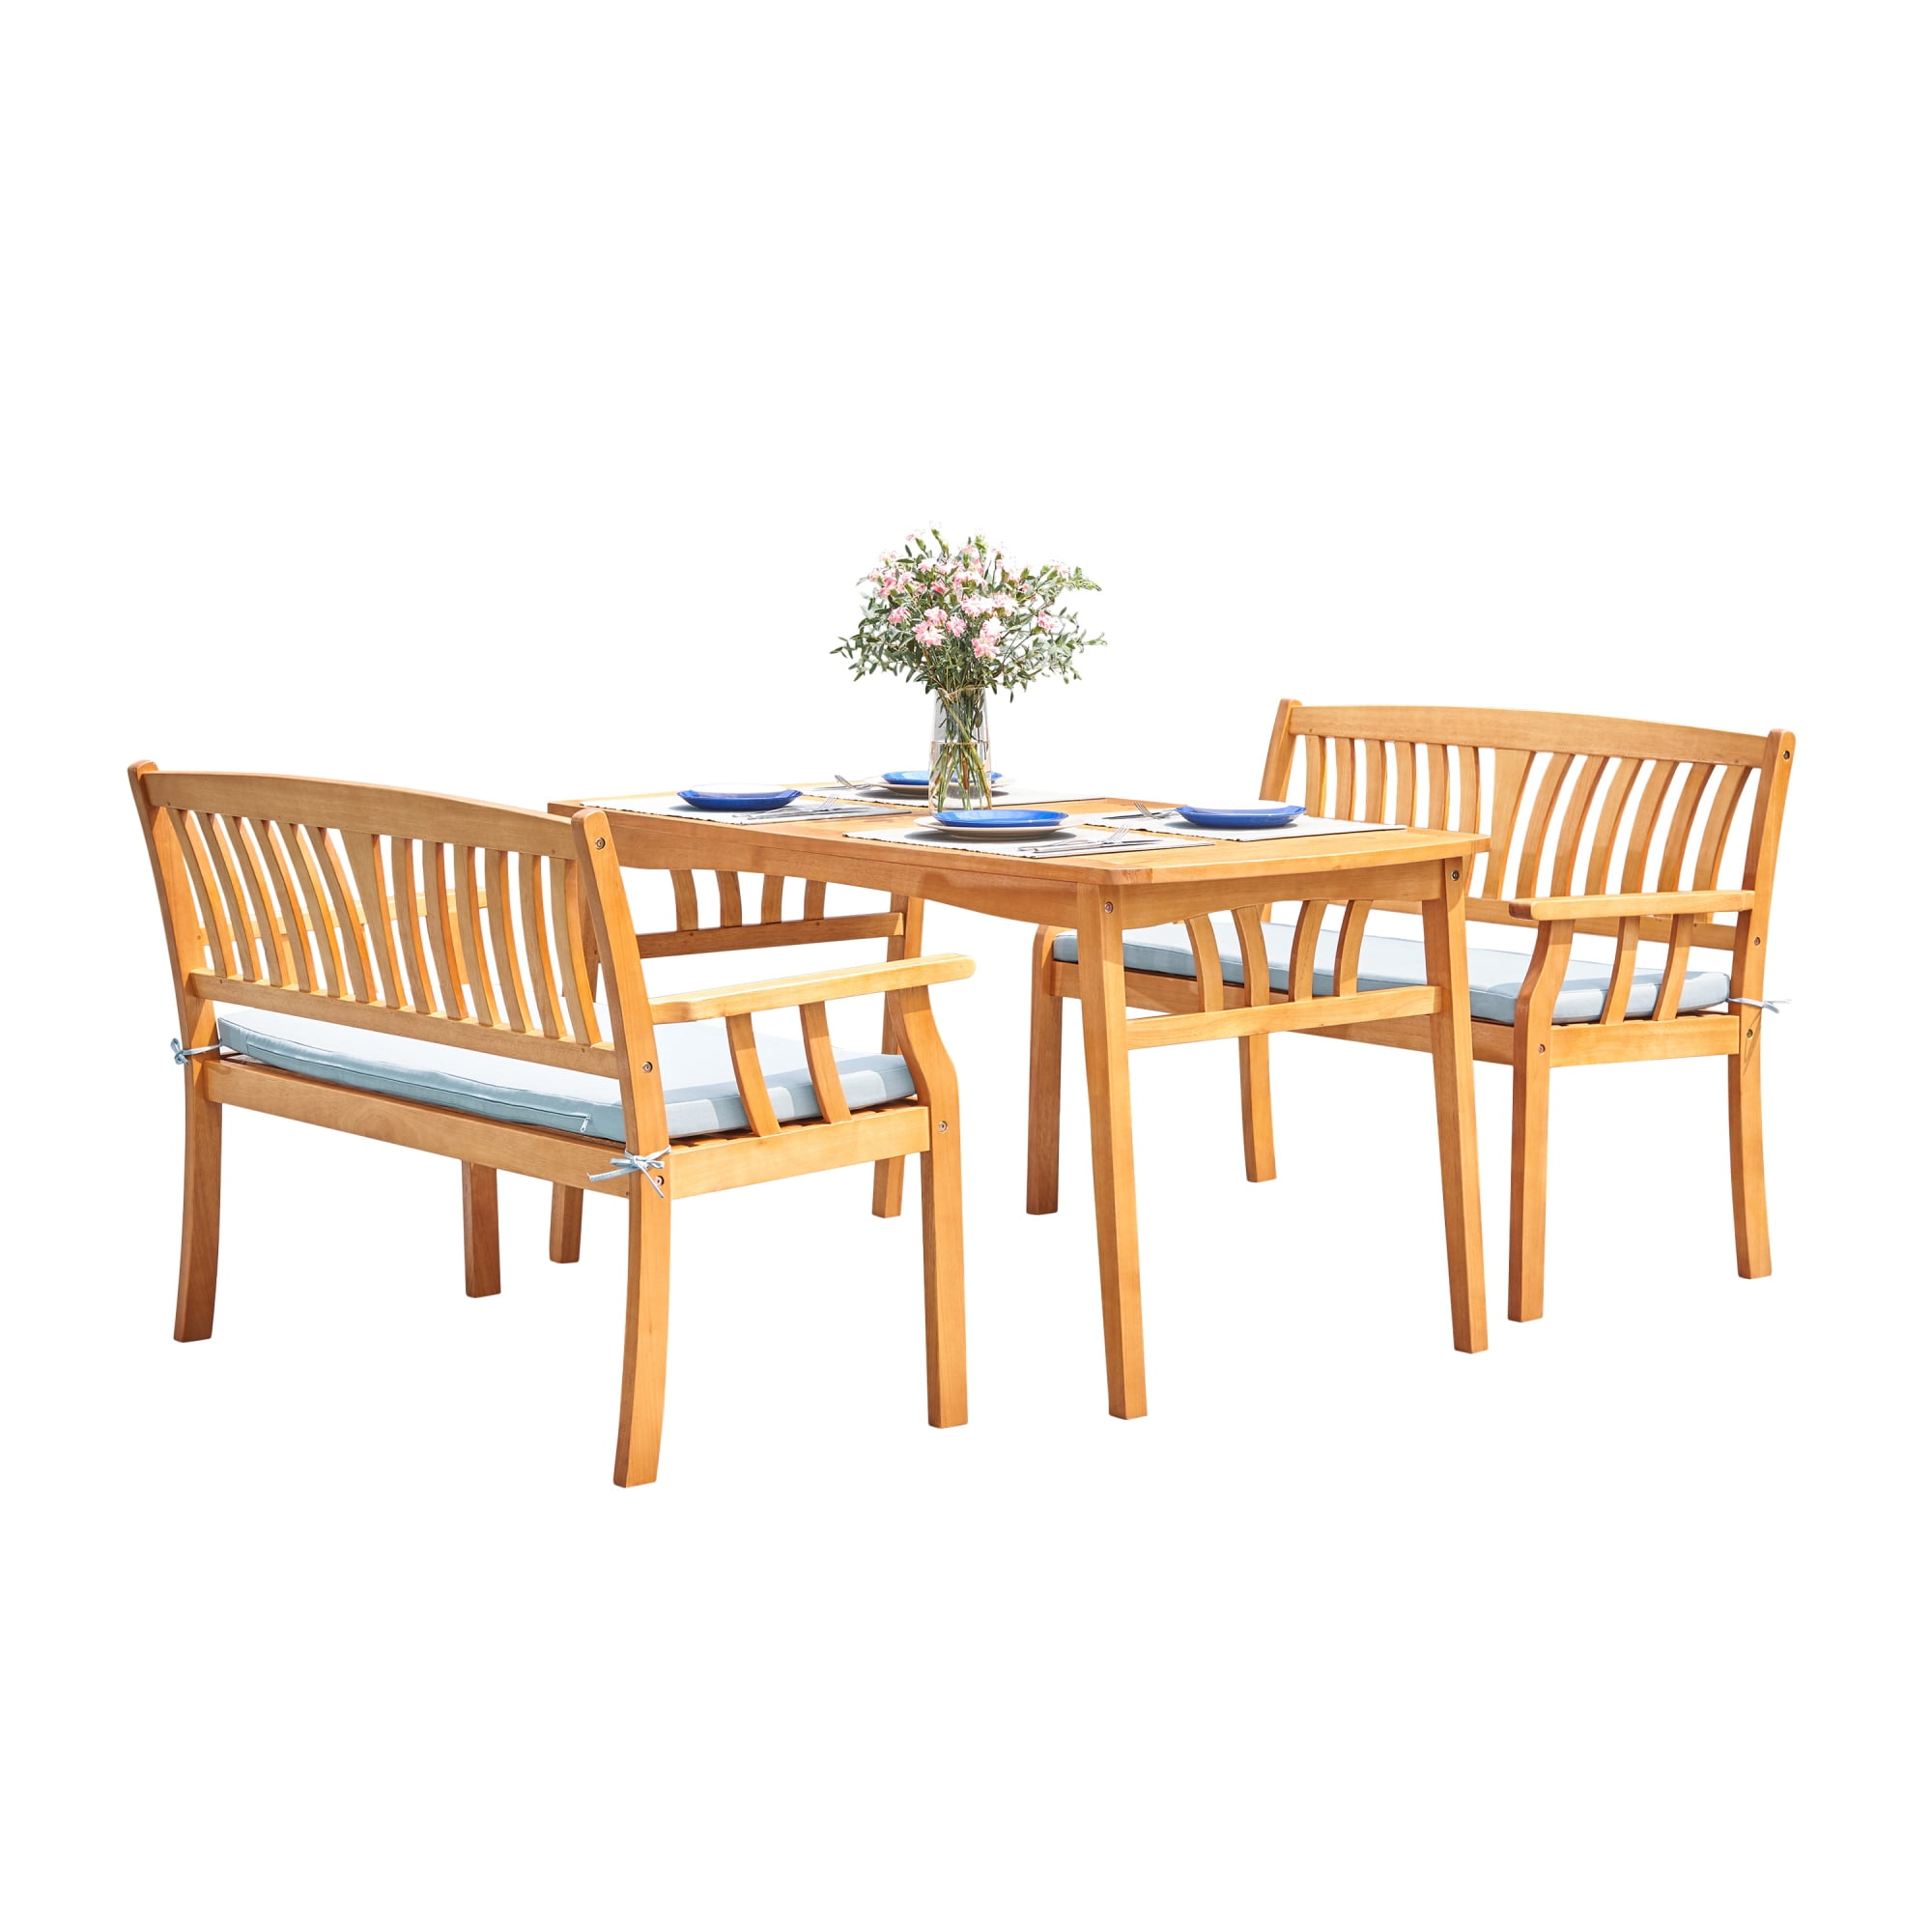 Kapalua Honey Nautical 3-Piece Wooden Outdoor Dining Set with 2 Benches